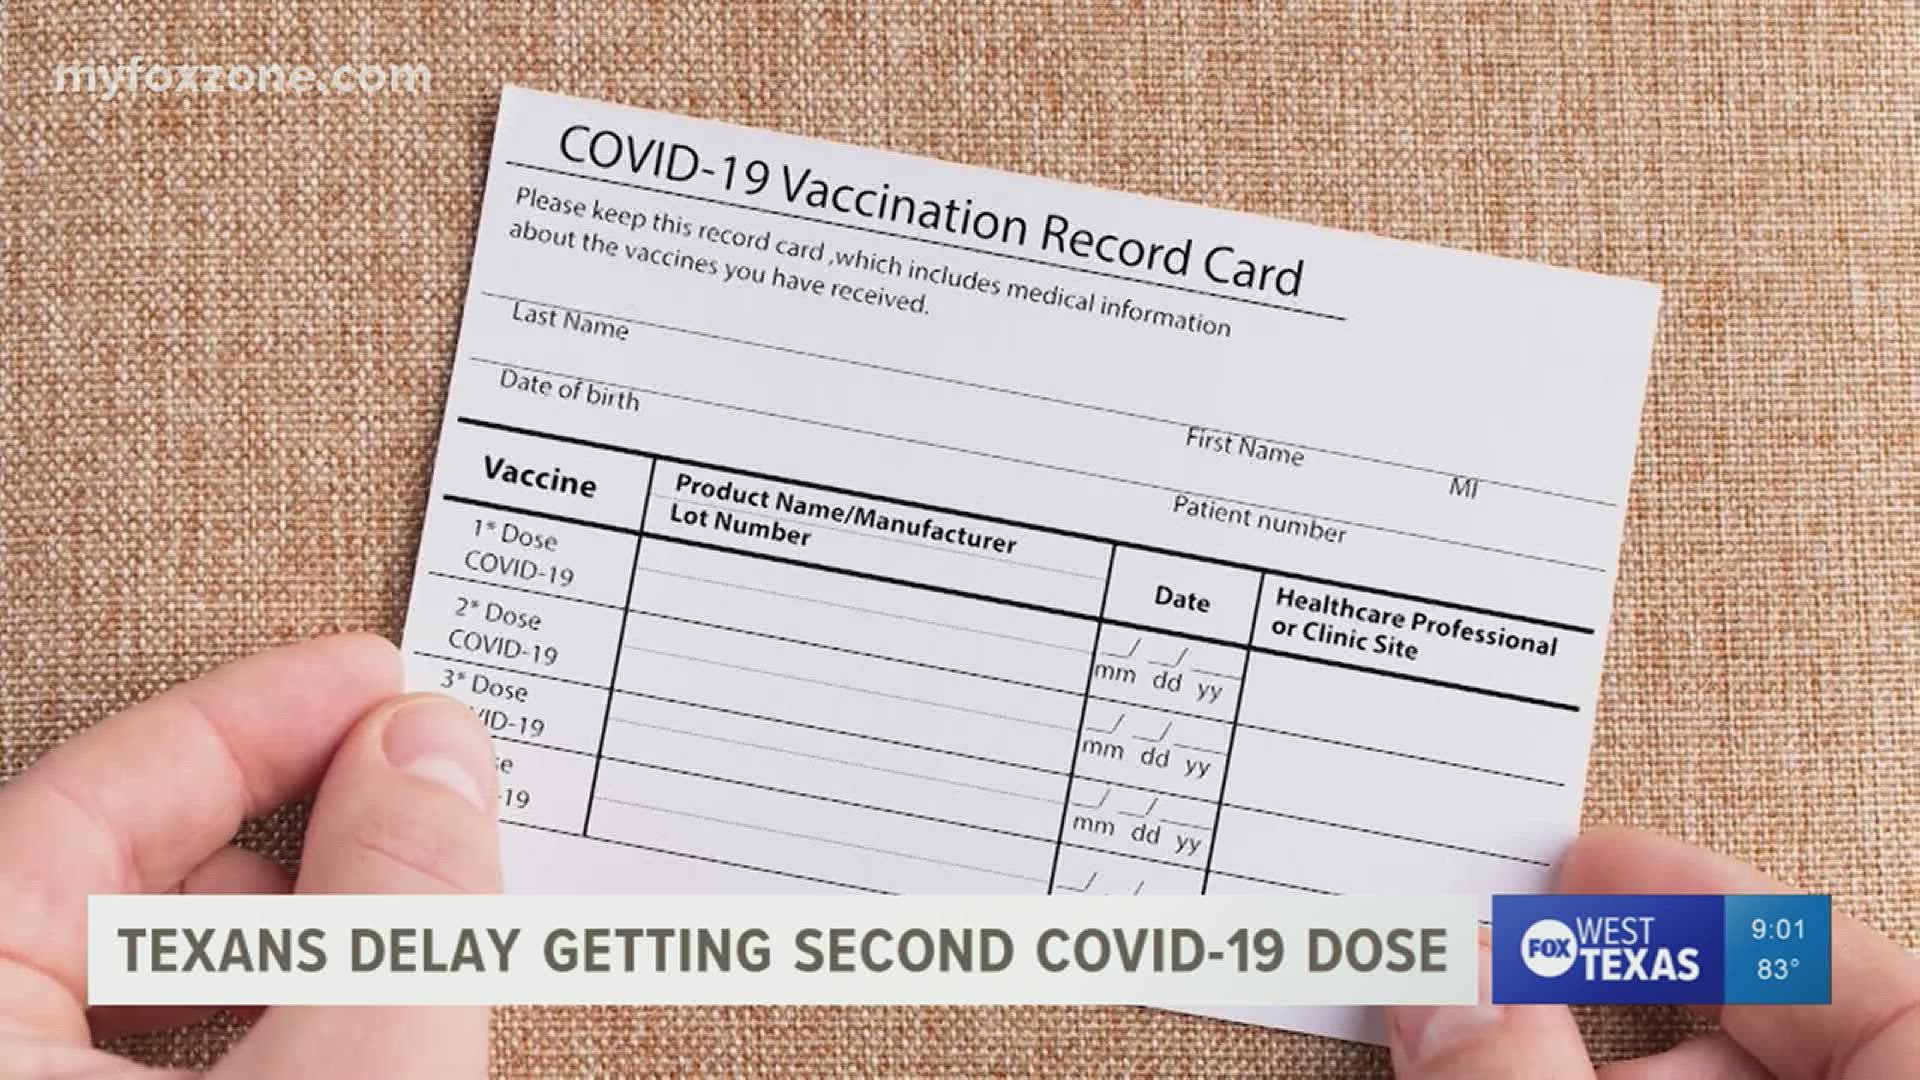 Health professionals advise Texans the importance of getting fully vaccinated to reduce the COVID-19 infection.